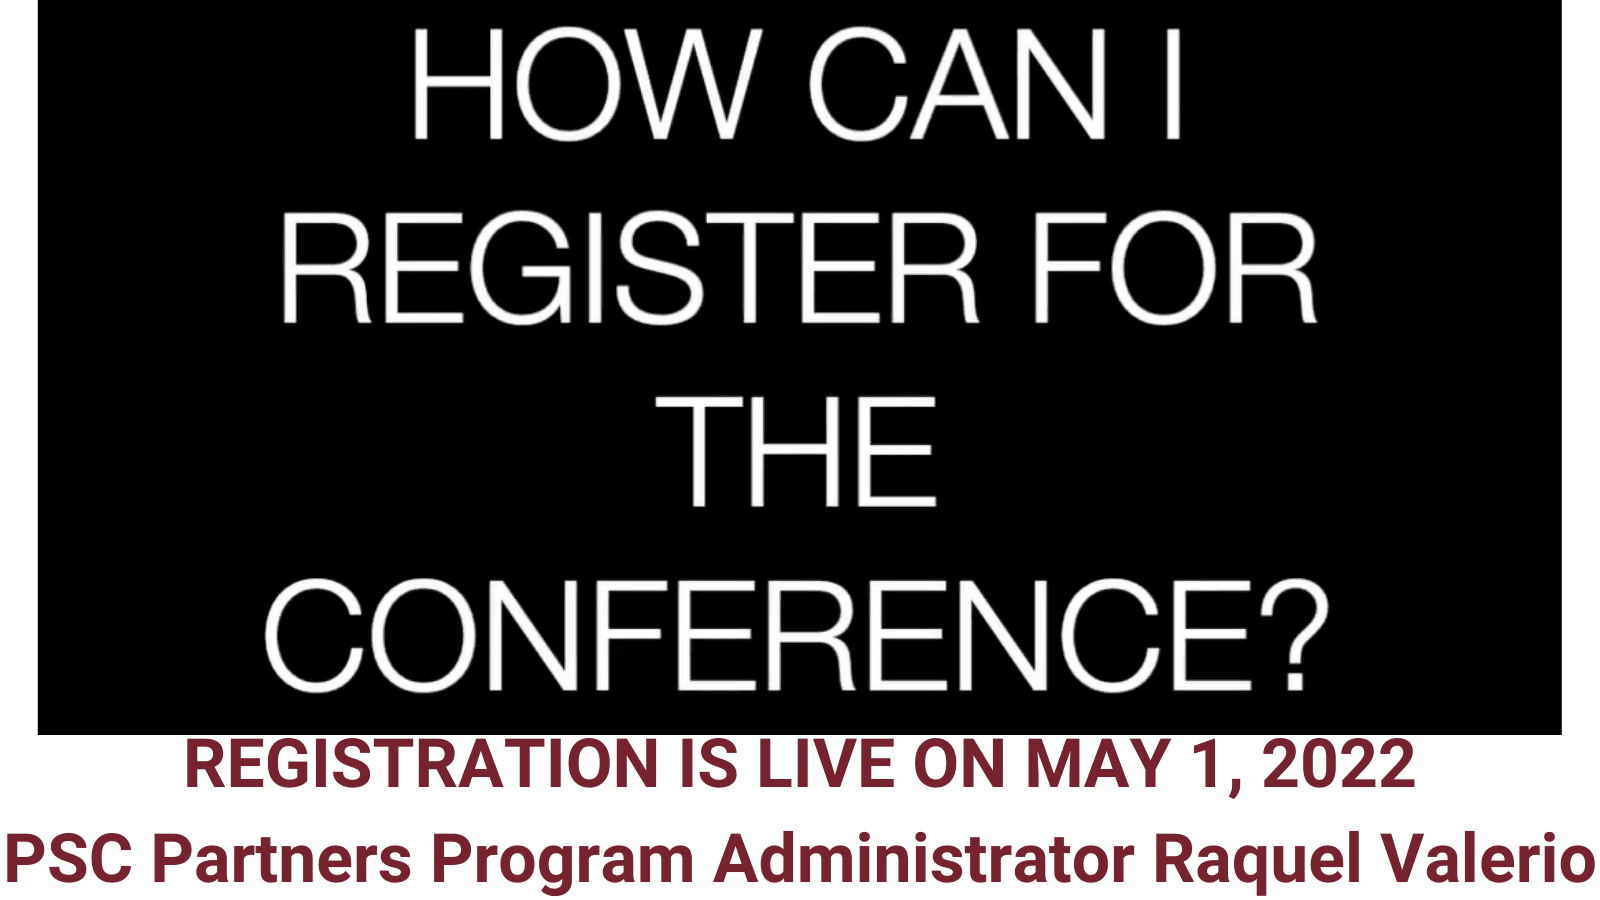 How can I register for the Conference?